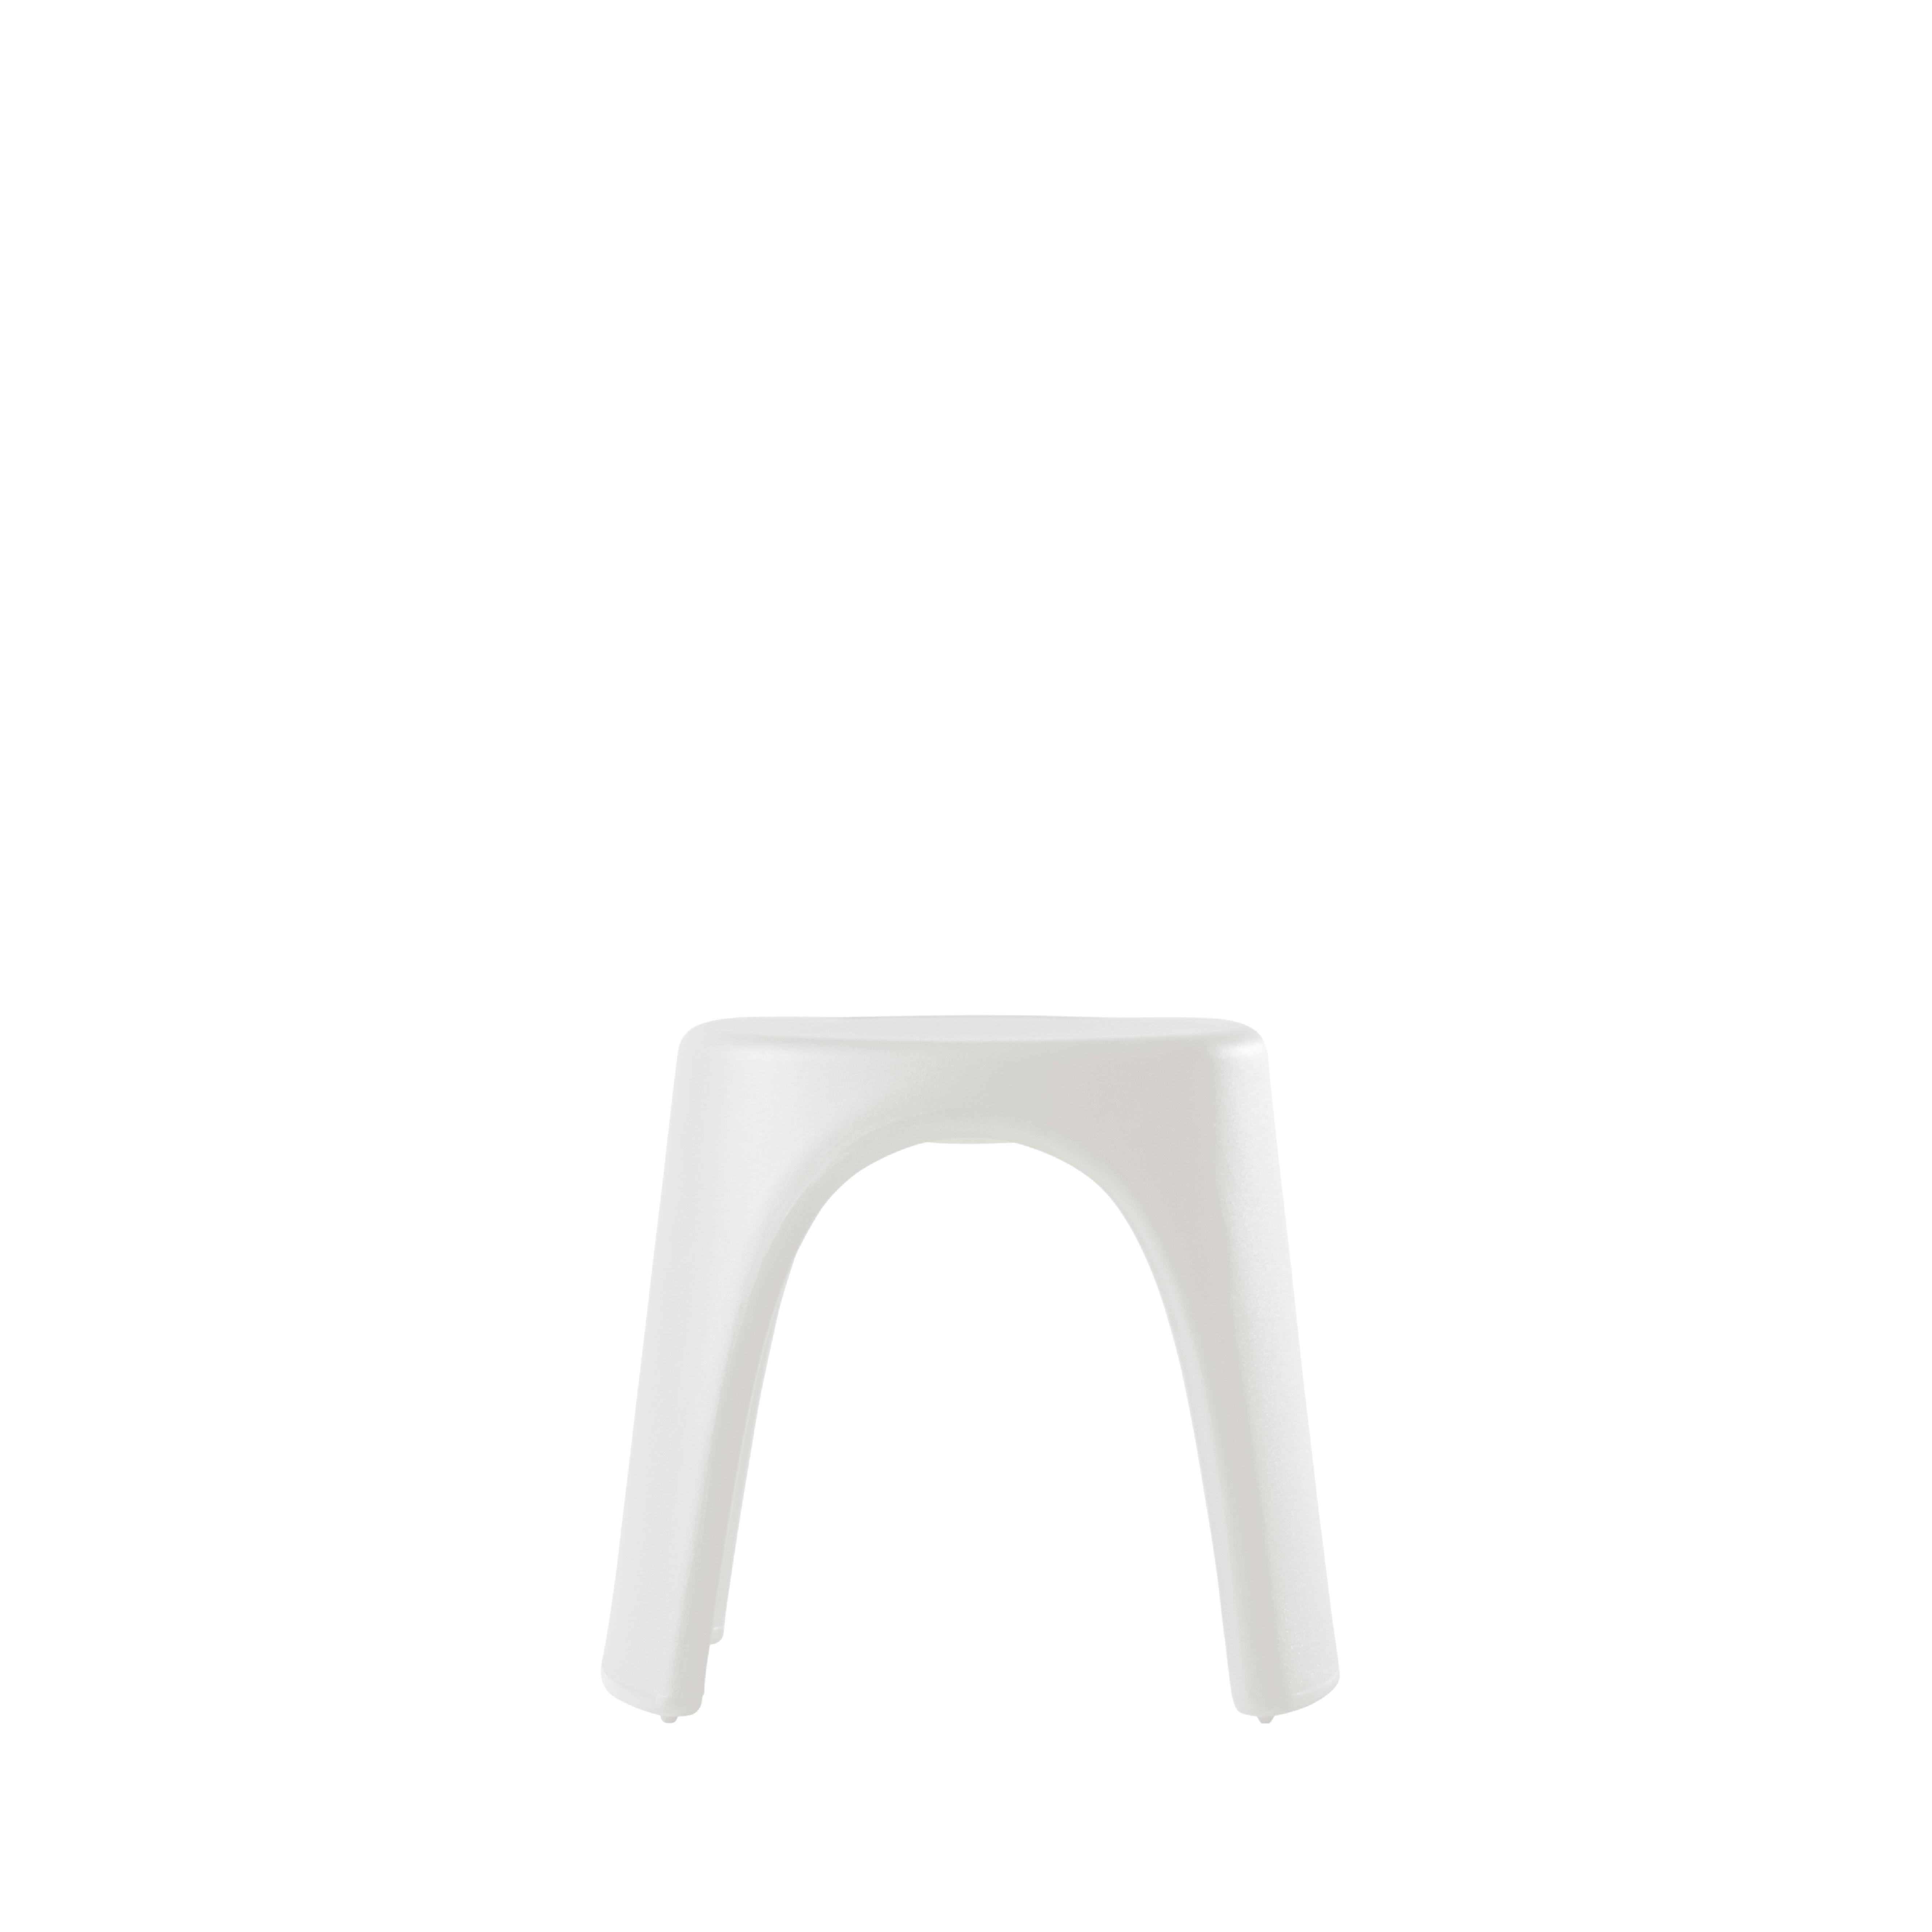 Argil Grey Amélie Sgabello Stool by Italo Pertichini
Dimensions: D 40 x W 46 x H 43 cm.
Materials: Polyethylene.
Weight: 4 kg.

Available in a standard version and lacquered version. Prices may vary. Available in different color options. This